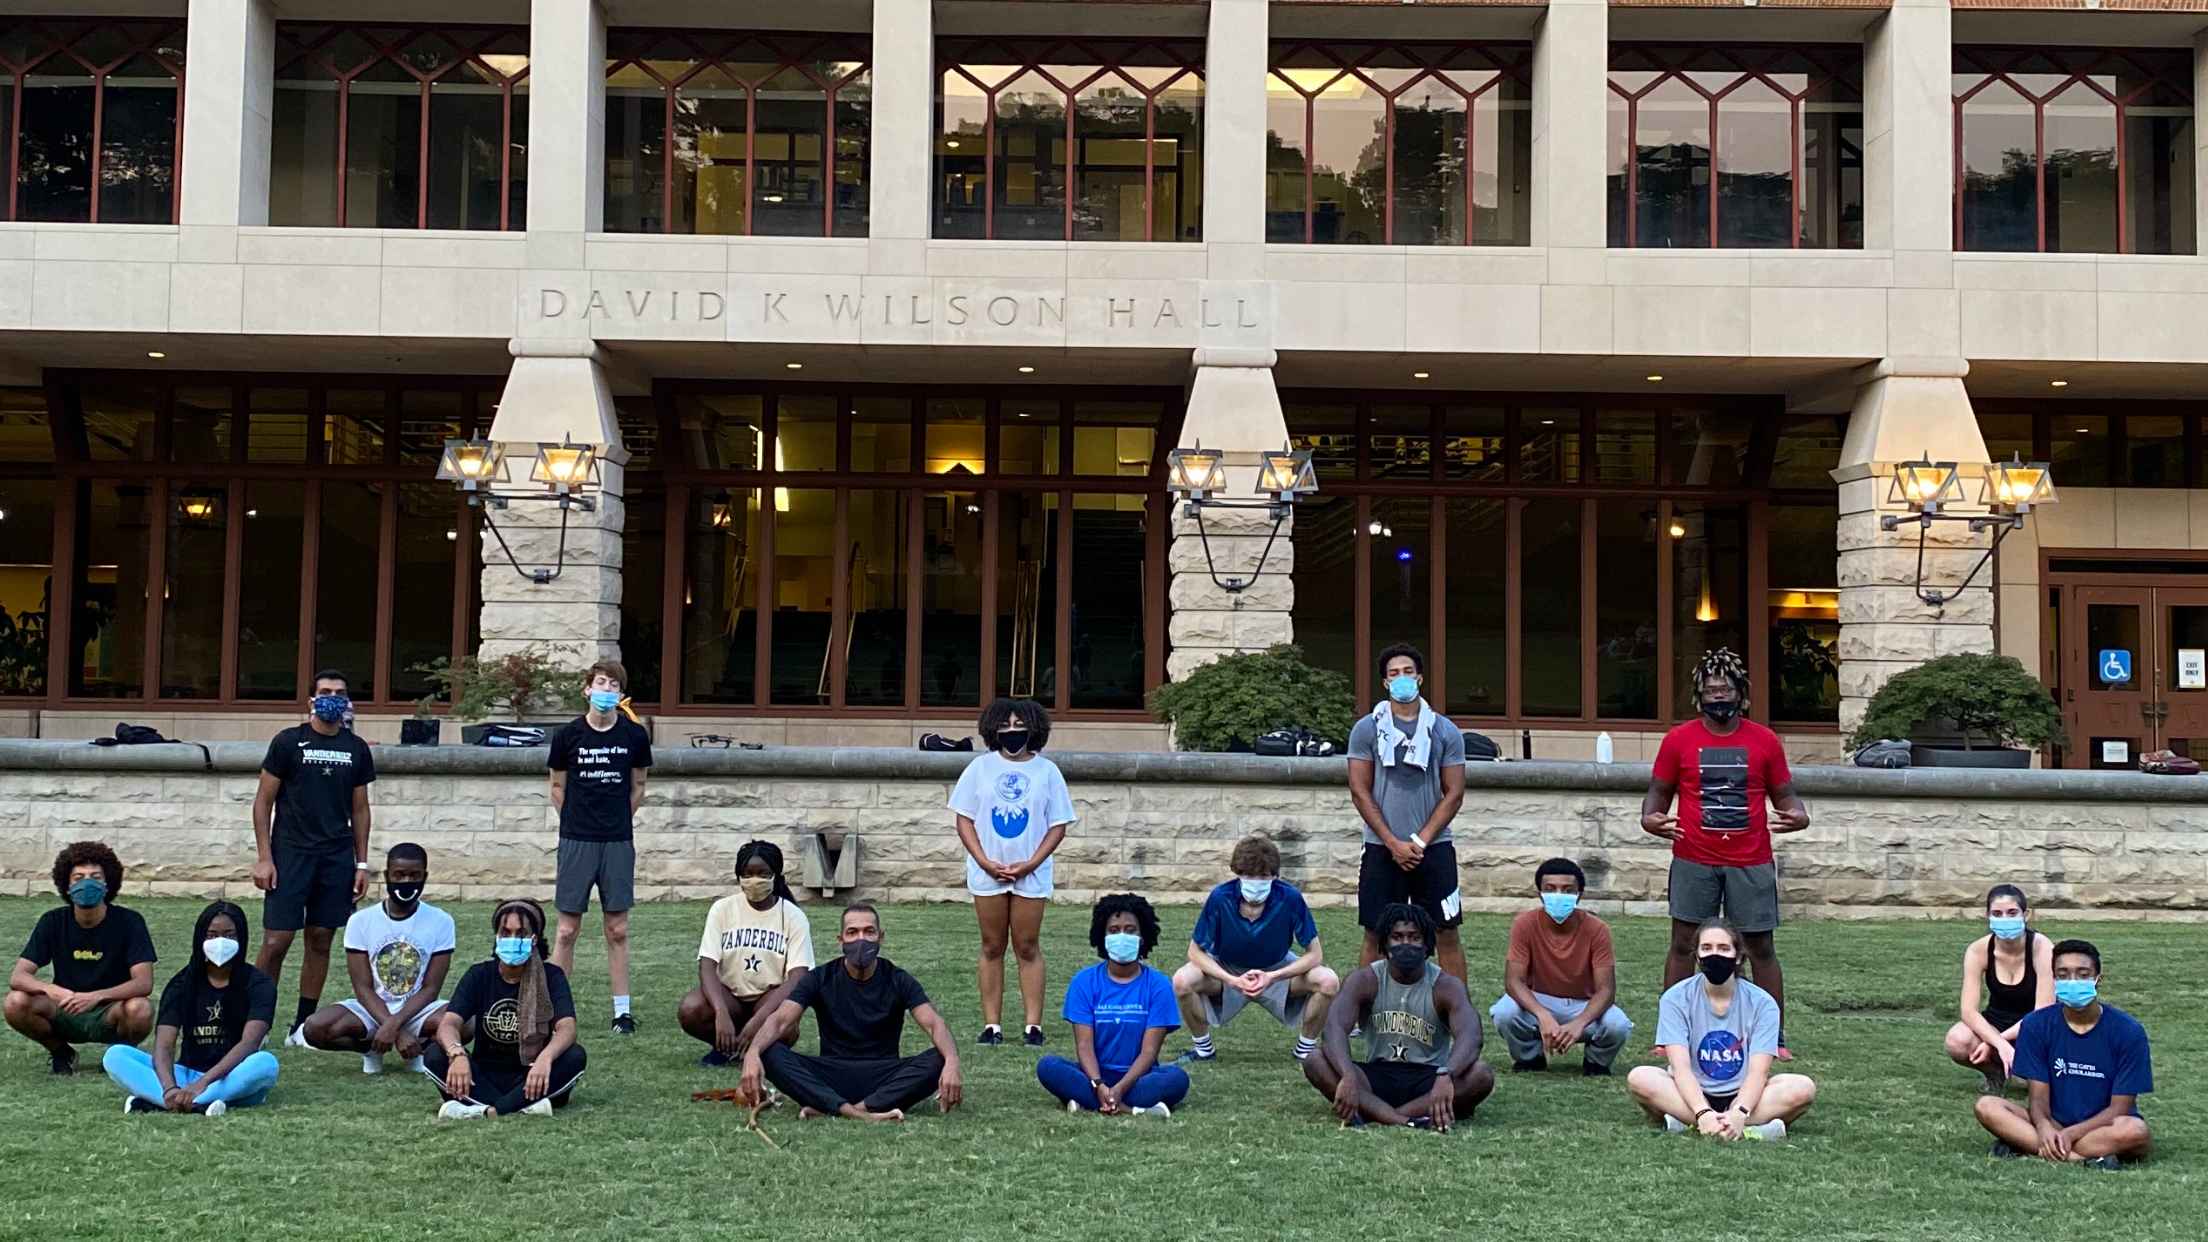 Gilman Whiting and students from his capoeira class pose, masked and socially distanced, on lawn in front of Wilson Hall